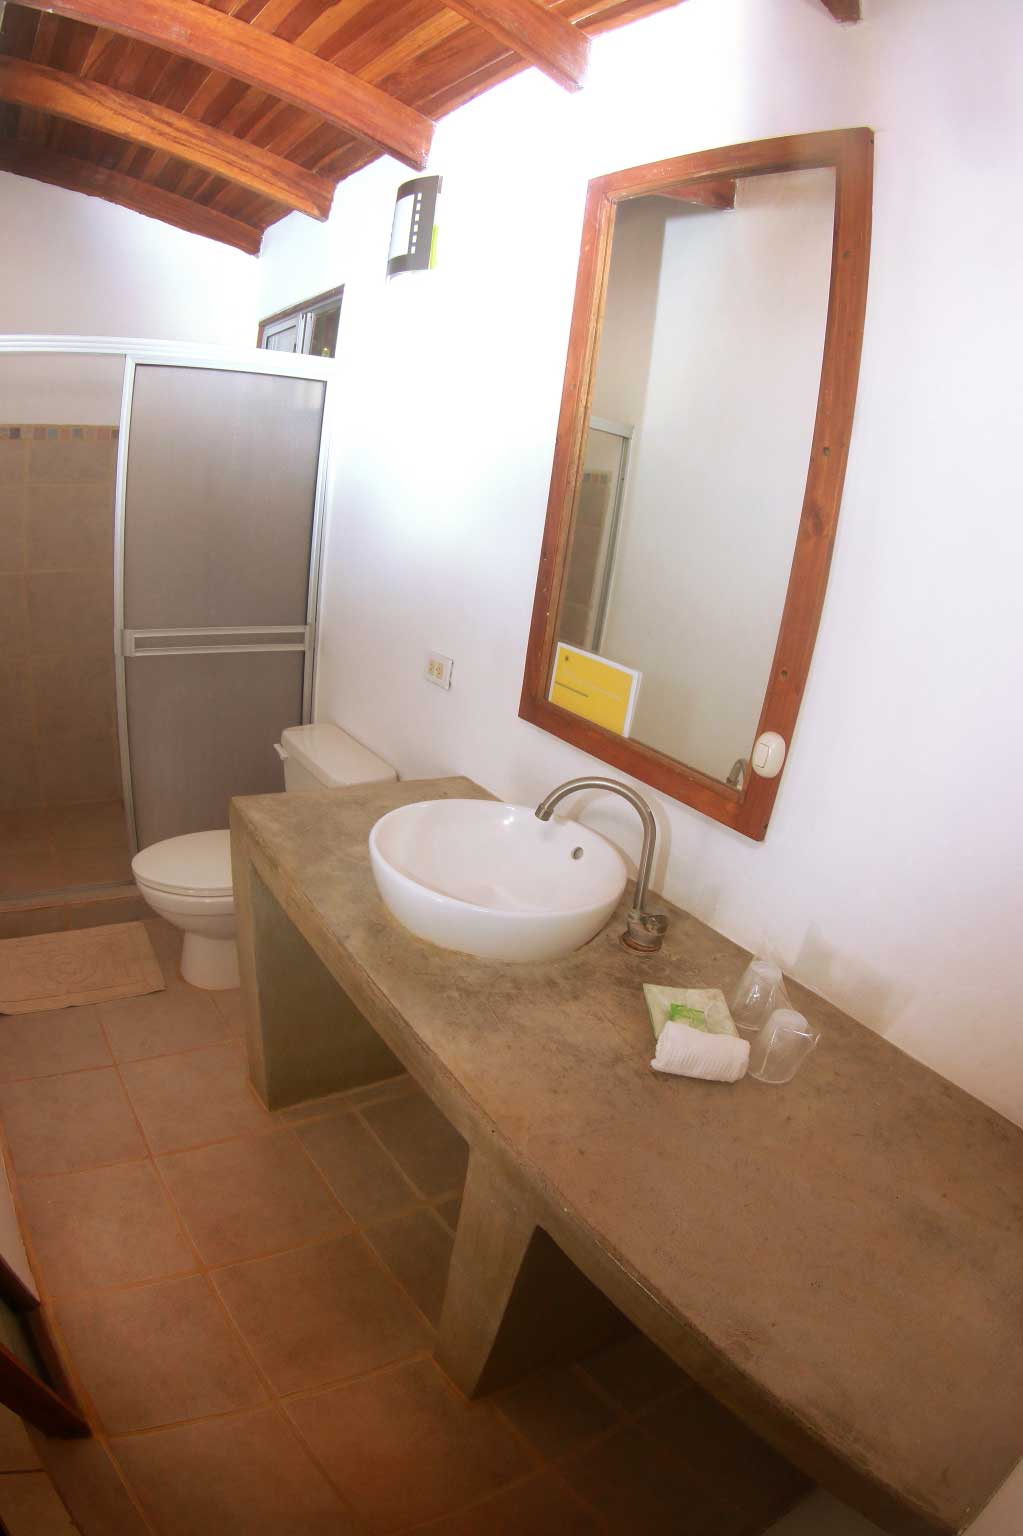 En suite bathroom at Indra Inn with concrete countertop, vessel sink, wood ceilings, large mirror, and tiled floors and shower